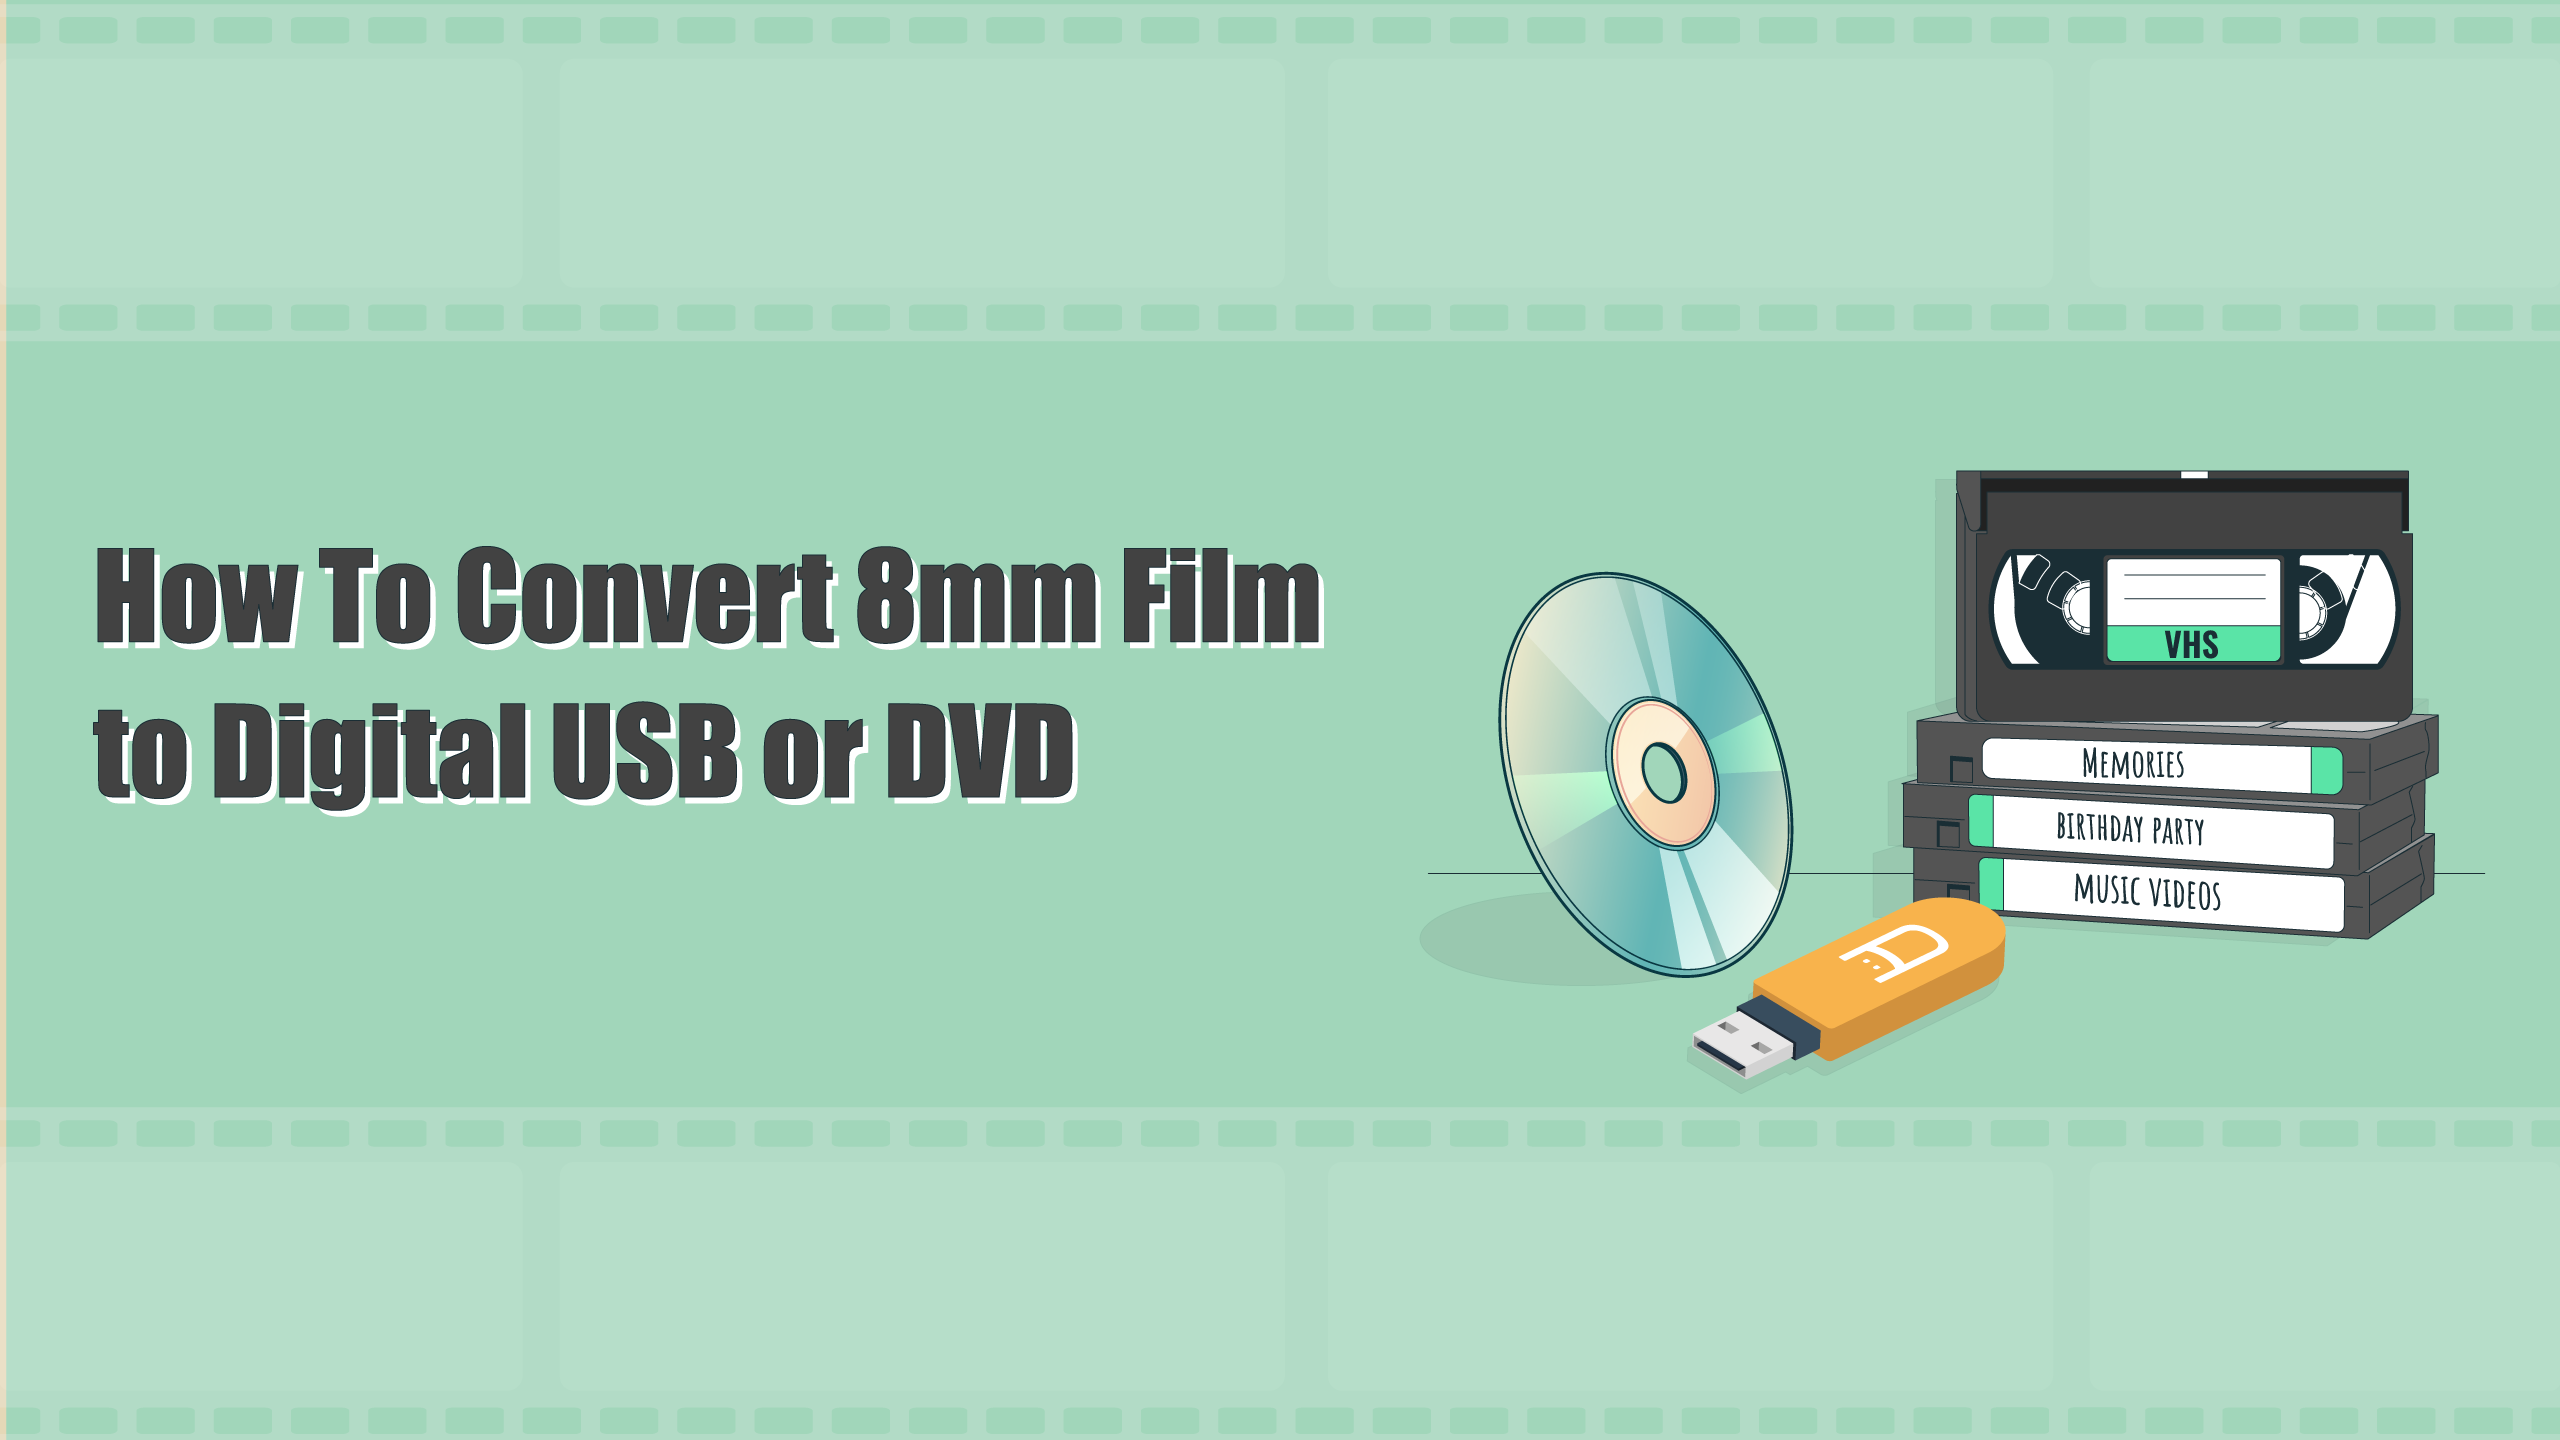 How To 8mm Film to for USB or DVD